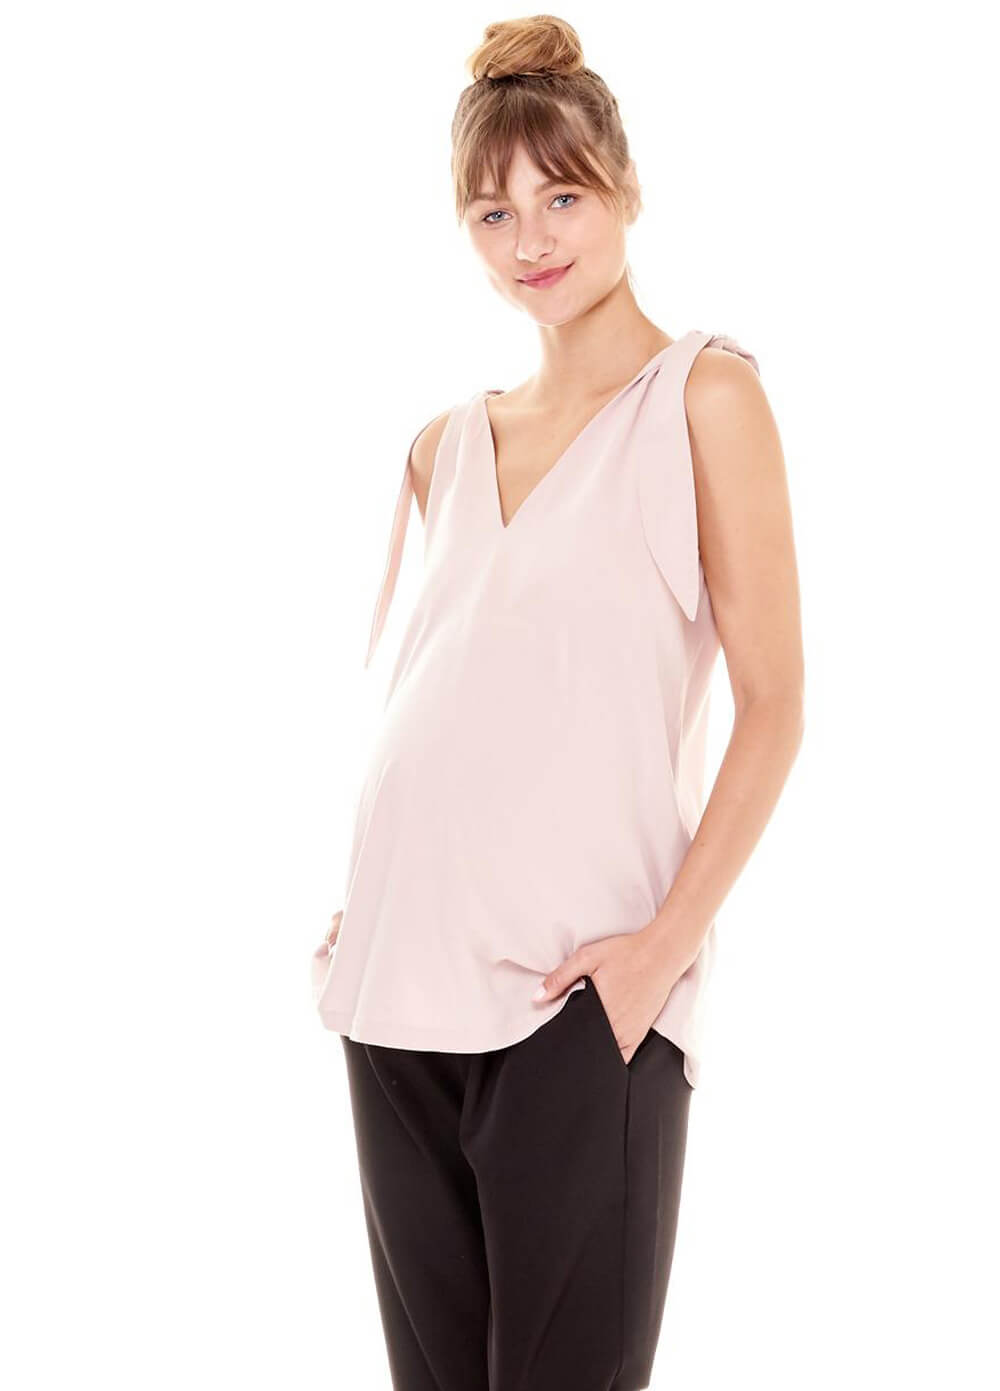 Shyla Maternity Tie Top in Blush by Imanimo